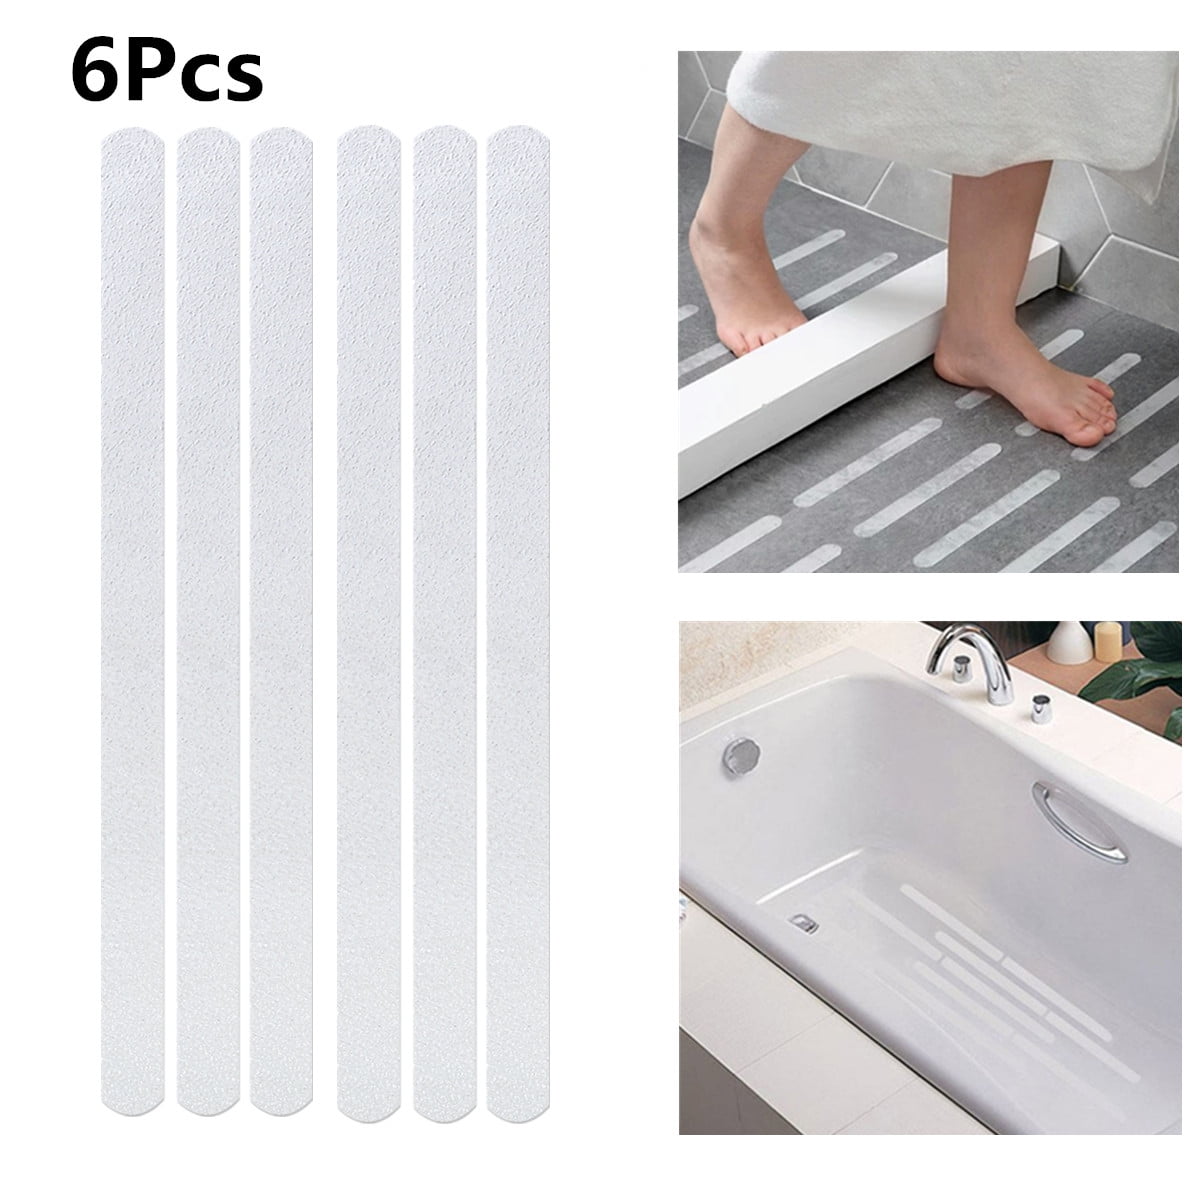 Details about   Non-Slip Bathtub Stickers 24 PCS Safety Bathroom Tubs Showers Treads Adhesive 